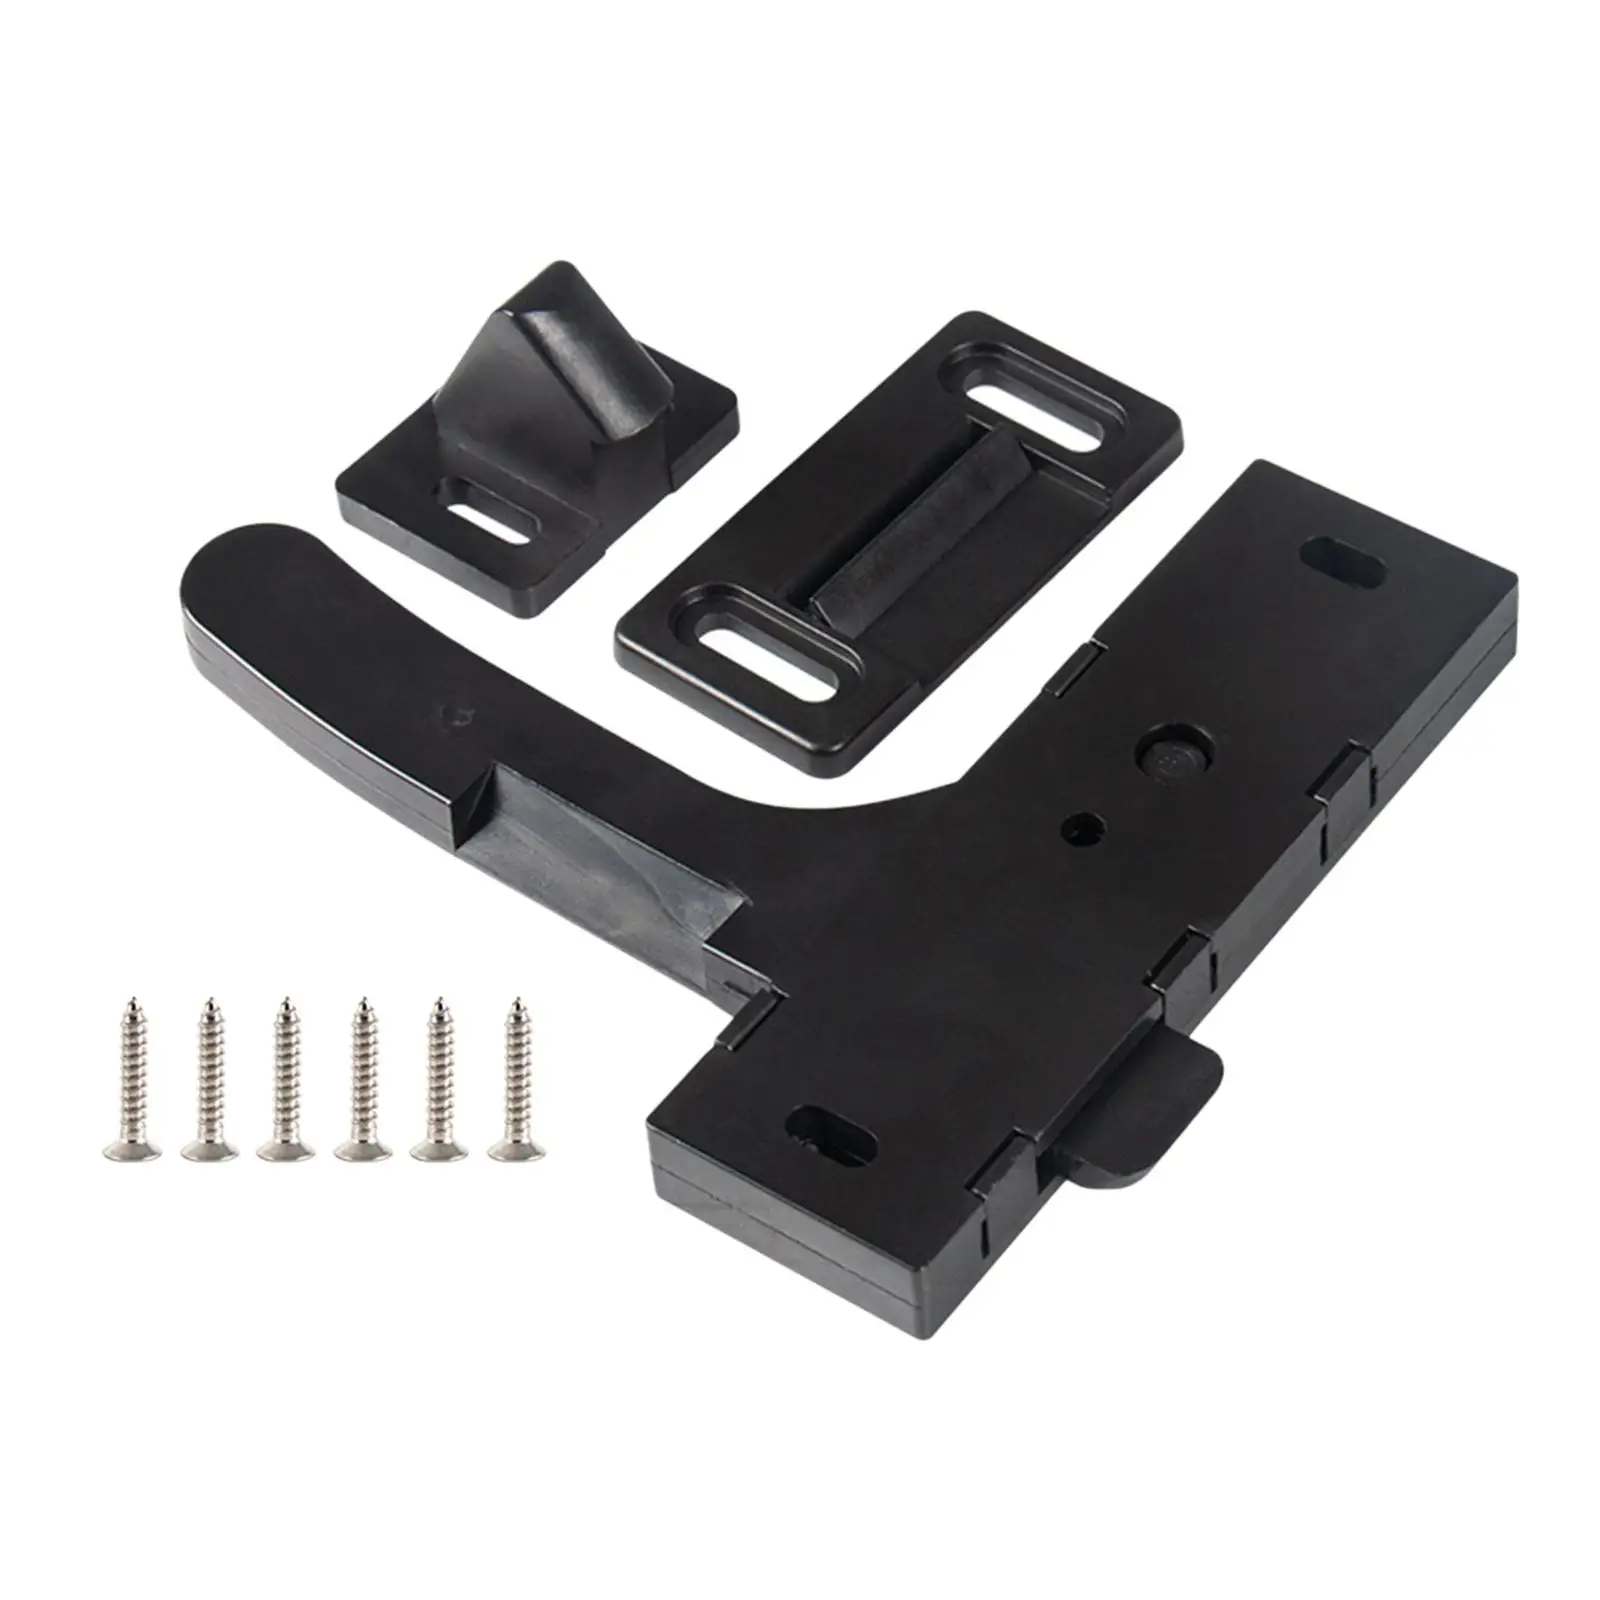 RV Screen Door Latch Car Parts High Performance Fittings Durable Easily Install